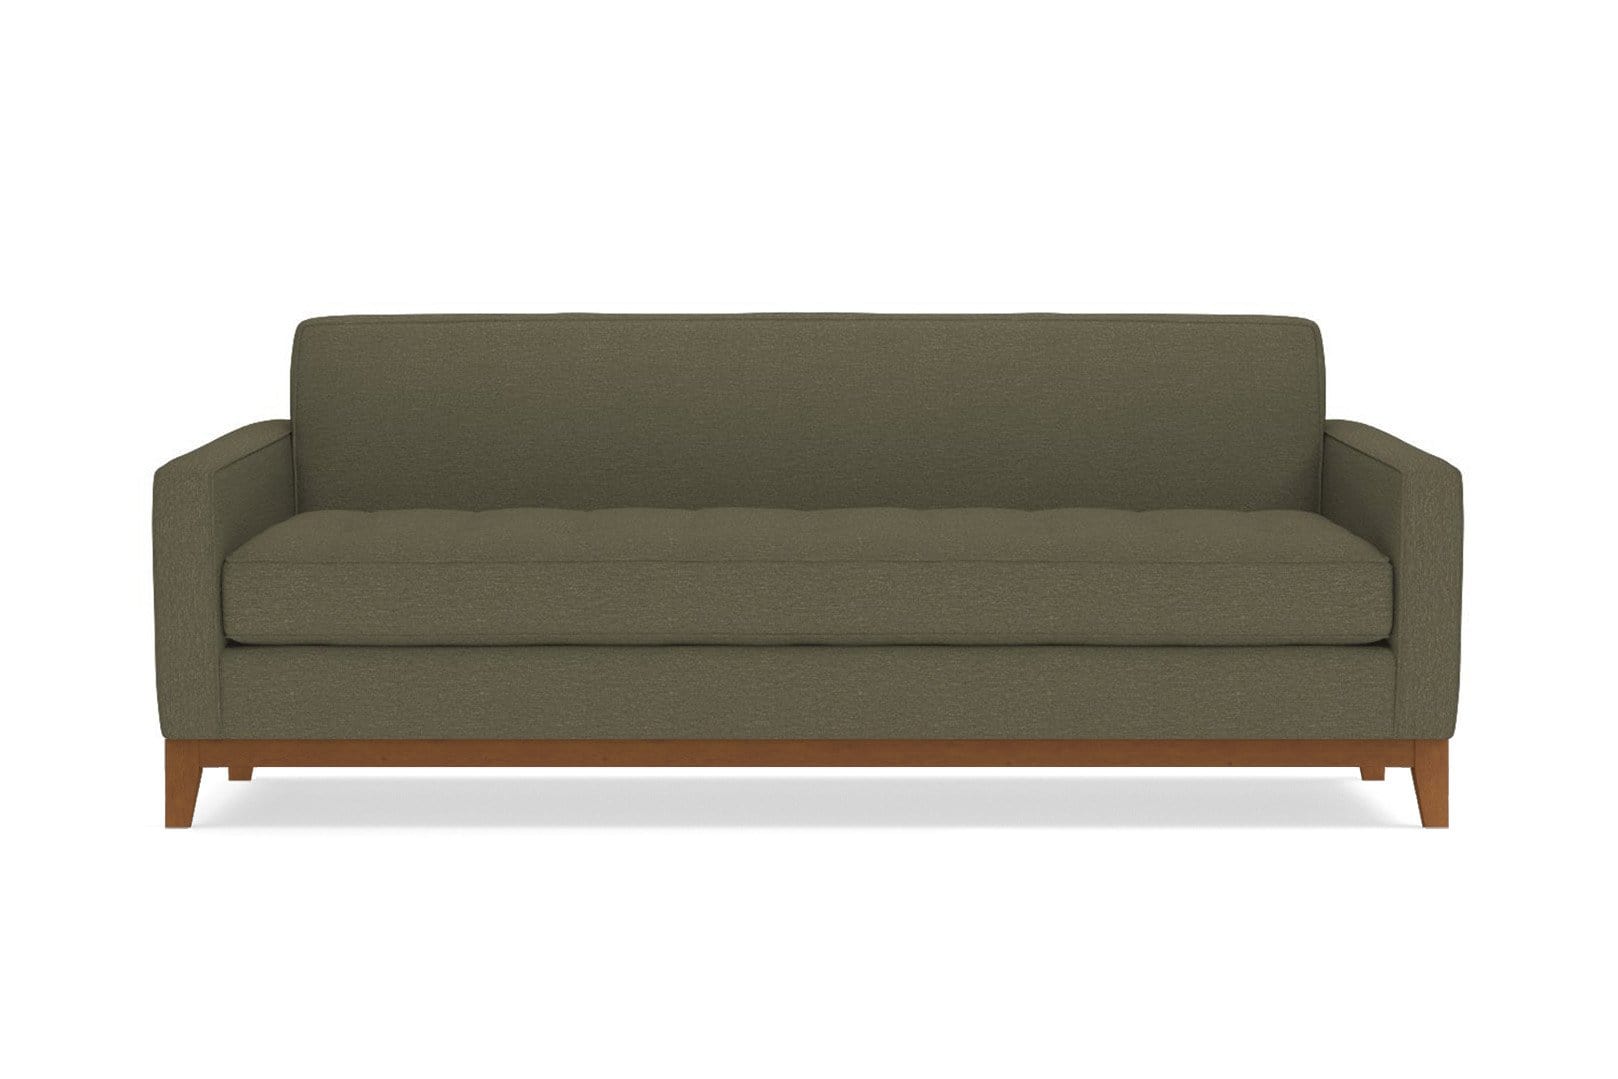 Monroe Drive Queen Size Sleeper Sofa - Green -  Pull Out Couch Made in the USA - Sold by Apt2B